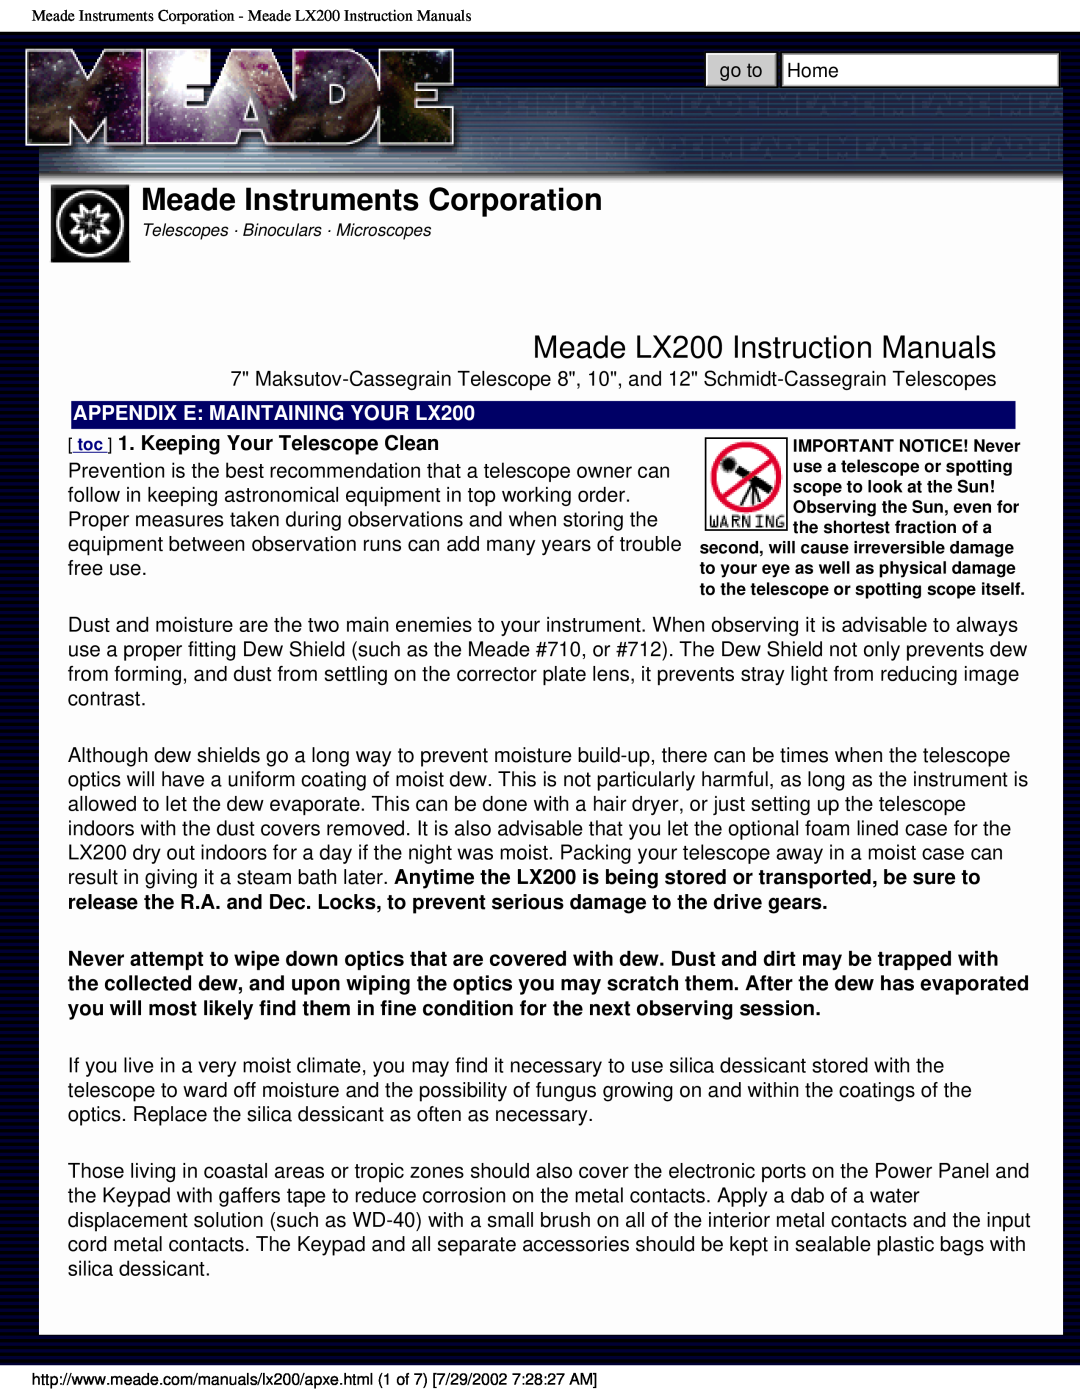 Meade instruction manual Meade Instruments Corporation, Meade LX200 Instruction Manuals 